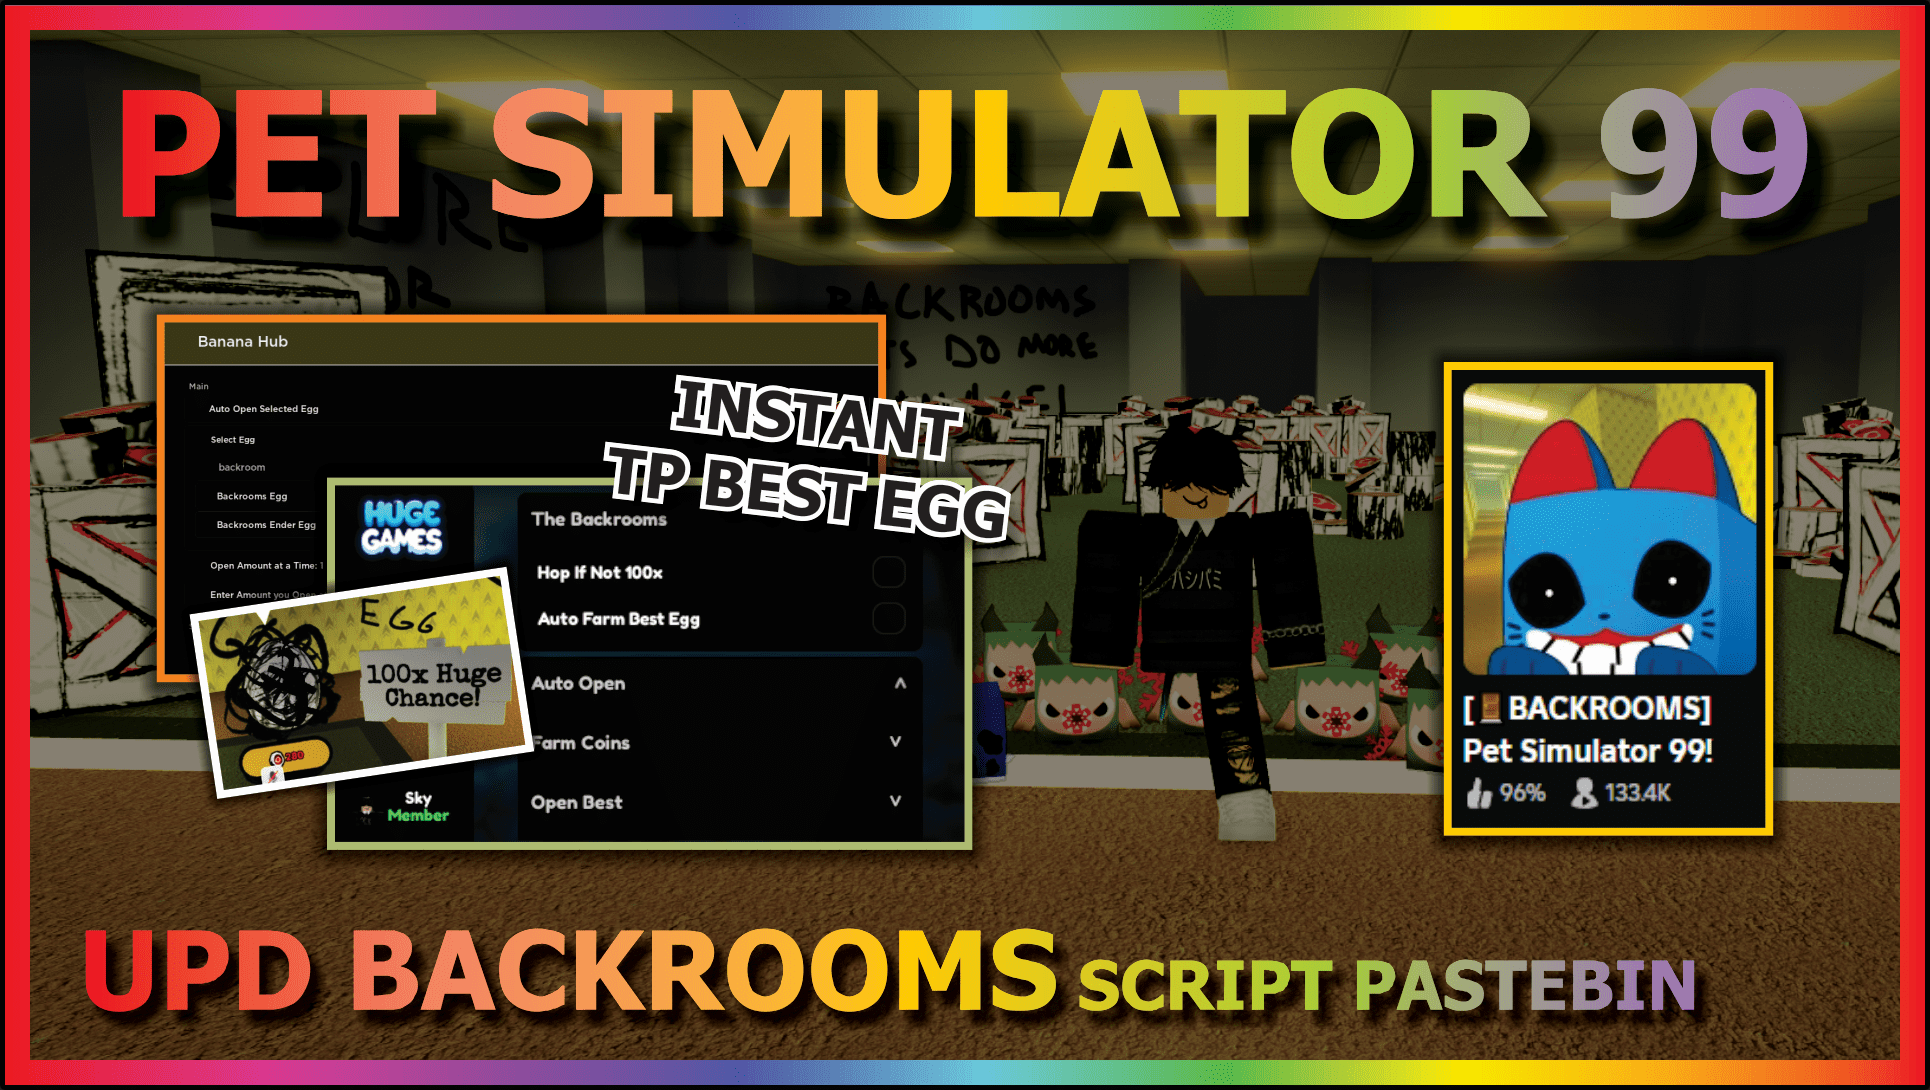 You are currently viewing PET SIMULATOR 99 (HUGE GAMES)🚪